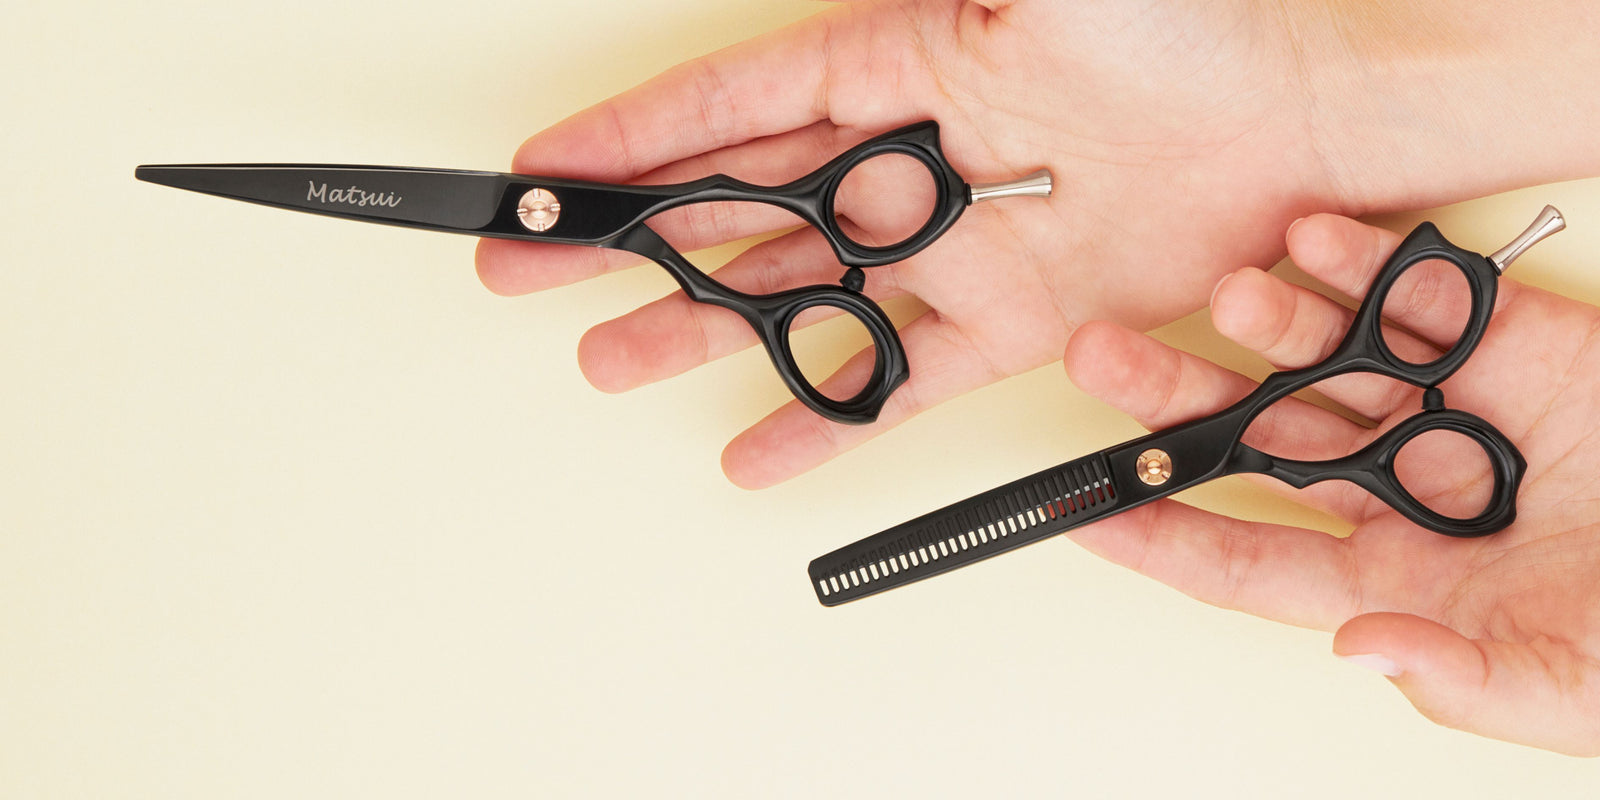 Professional Hair Scissors-1 Piece Barber Beauty Hairdressing